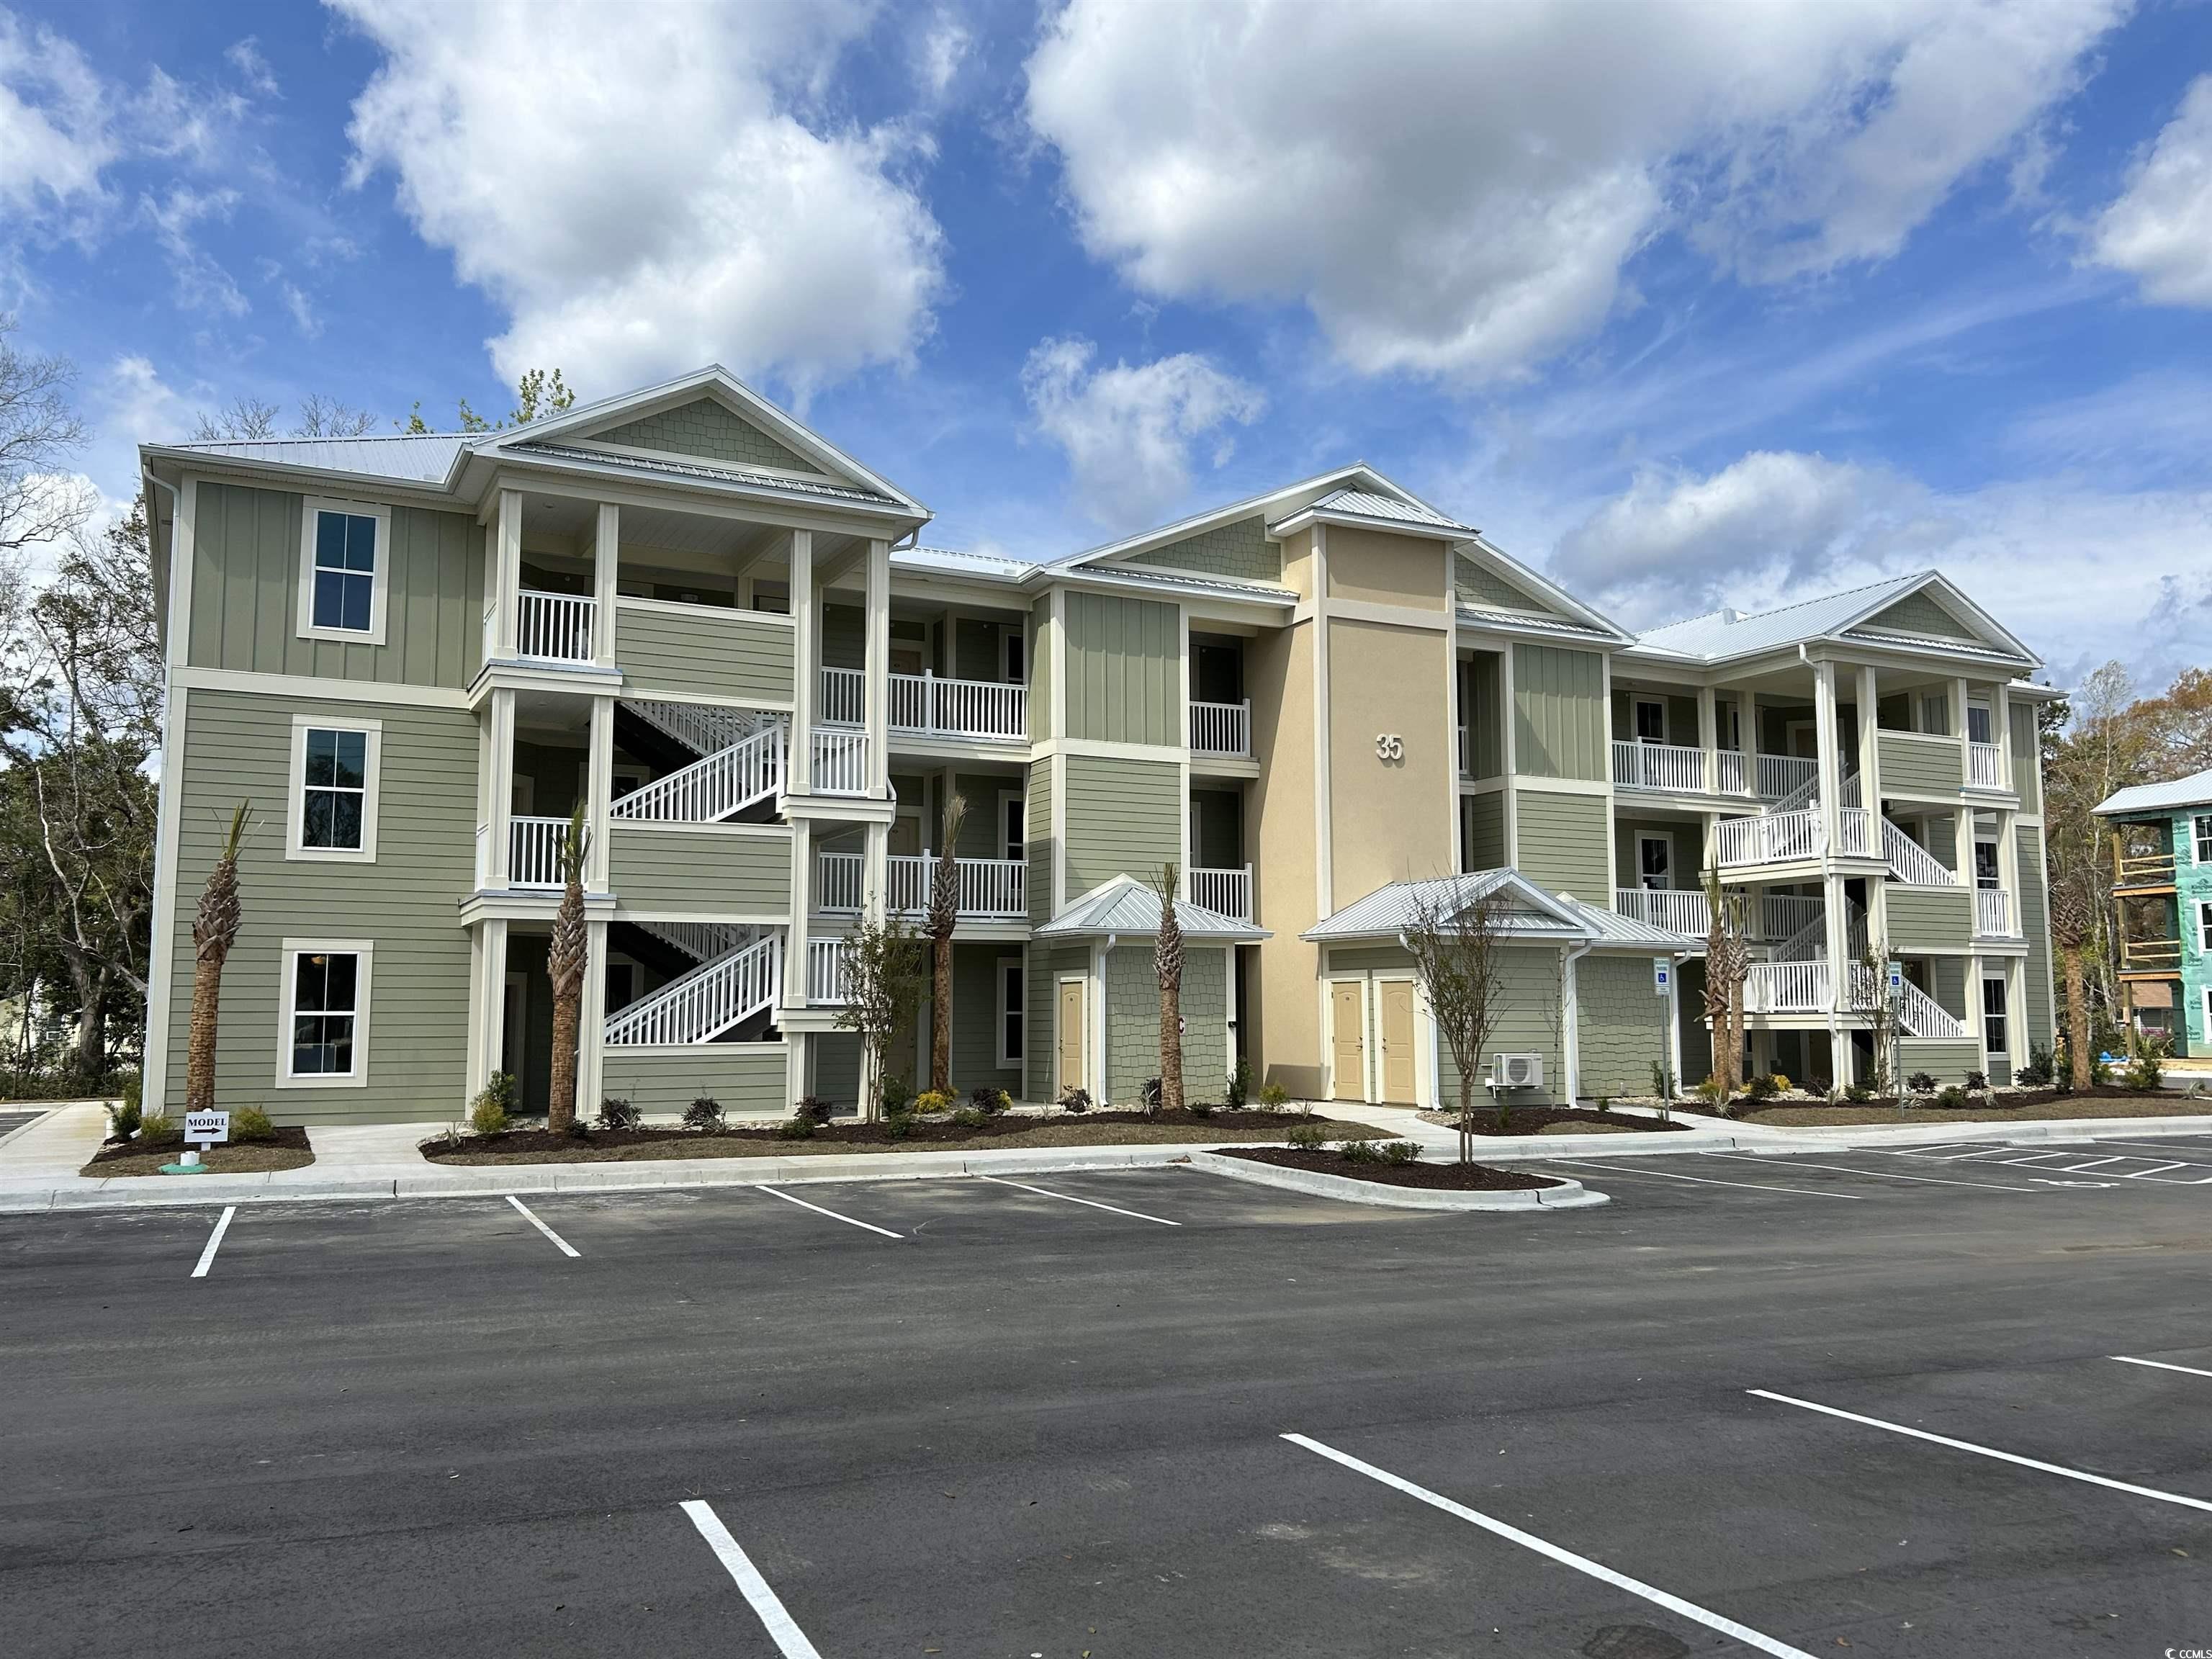 this condo community is located in the heart of the south carolina coast in a charming, historic fishing village. enjoy boating, live music, restaurants and scenic marsh views. it is located just 20 miles south of myrtle beach.  the condos boast hardwood floors in the living areas, granite countertops in the kitchen and much more. each building has it's own elevator. enjoy the community pool and clubhouse. (interior photos are from a previously built condo project. specifications and colors may vary.) square footage is approximate; the buyer and buyer's agent are responsible for verifying all square footage and all other information. square footage came from the builder's floor plans and survey. seller/builder reserves the right and may change these floor plans, specifications, and dimensions without prior notice.